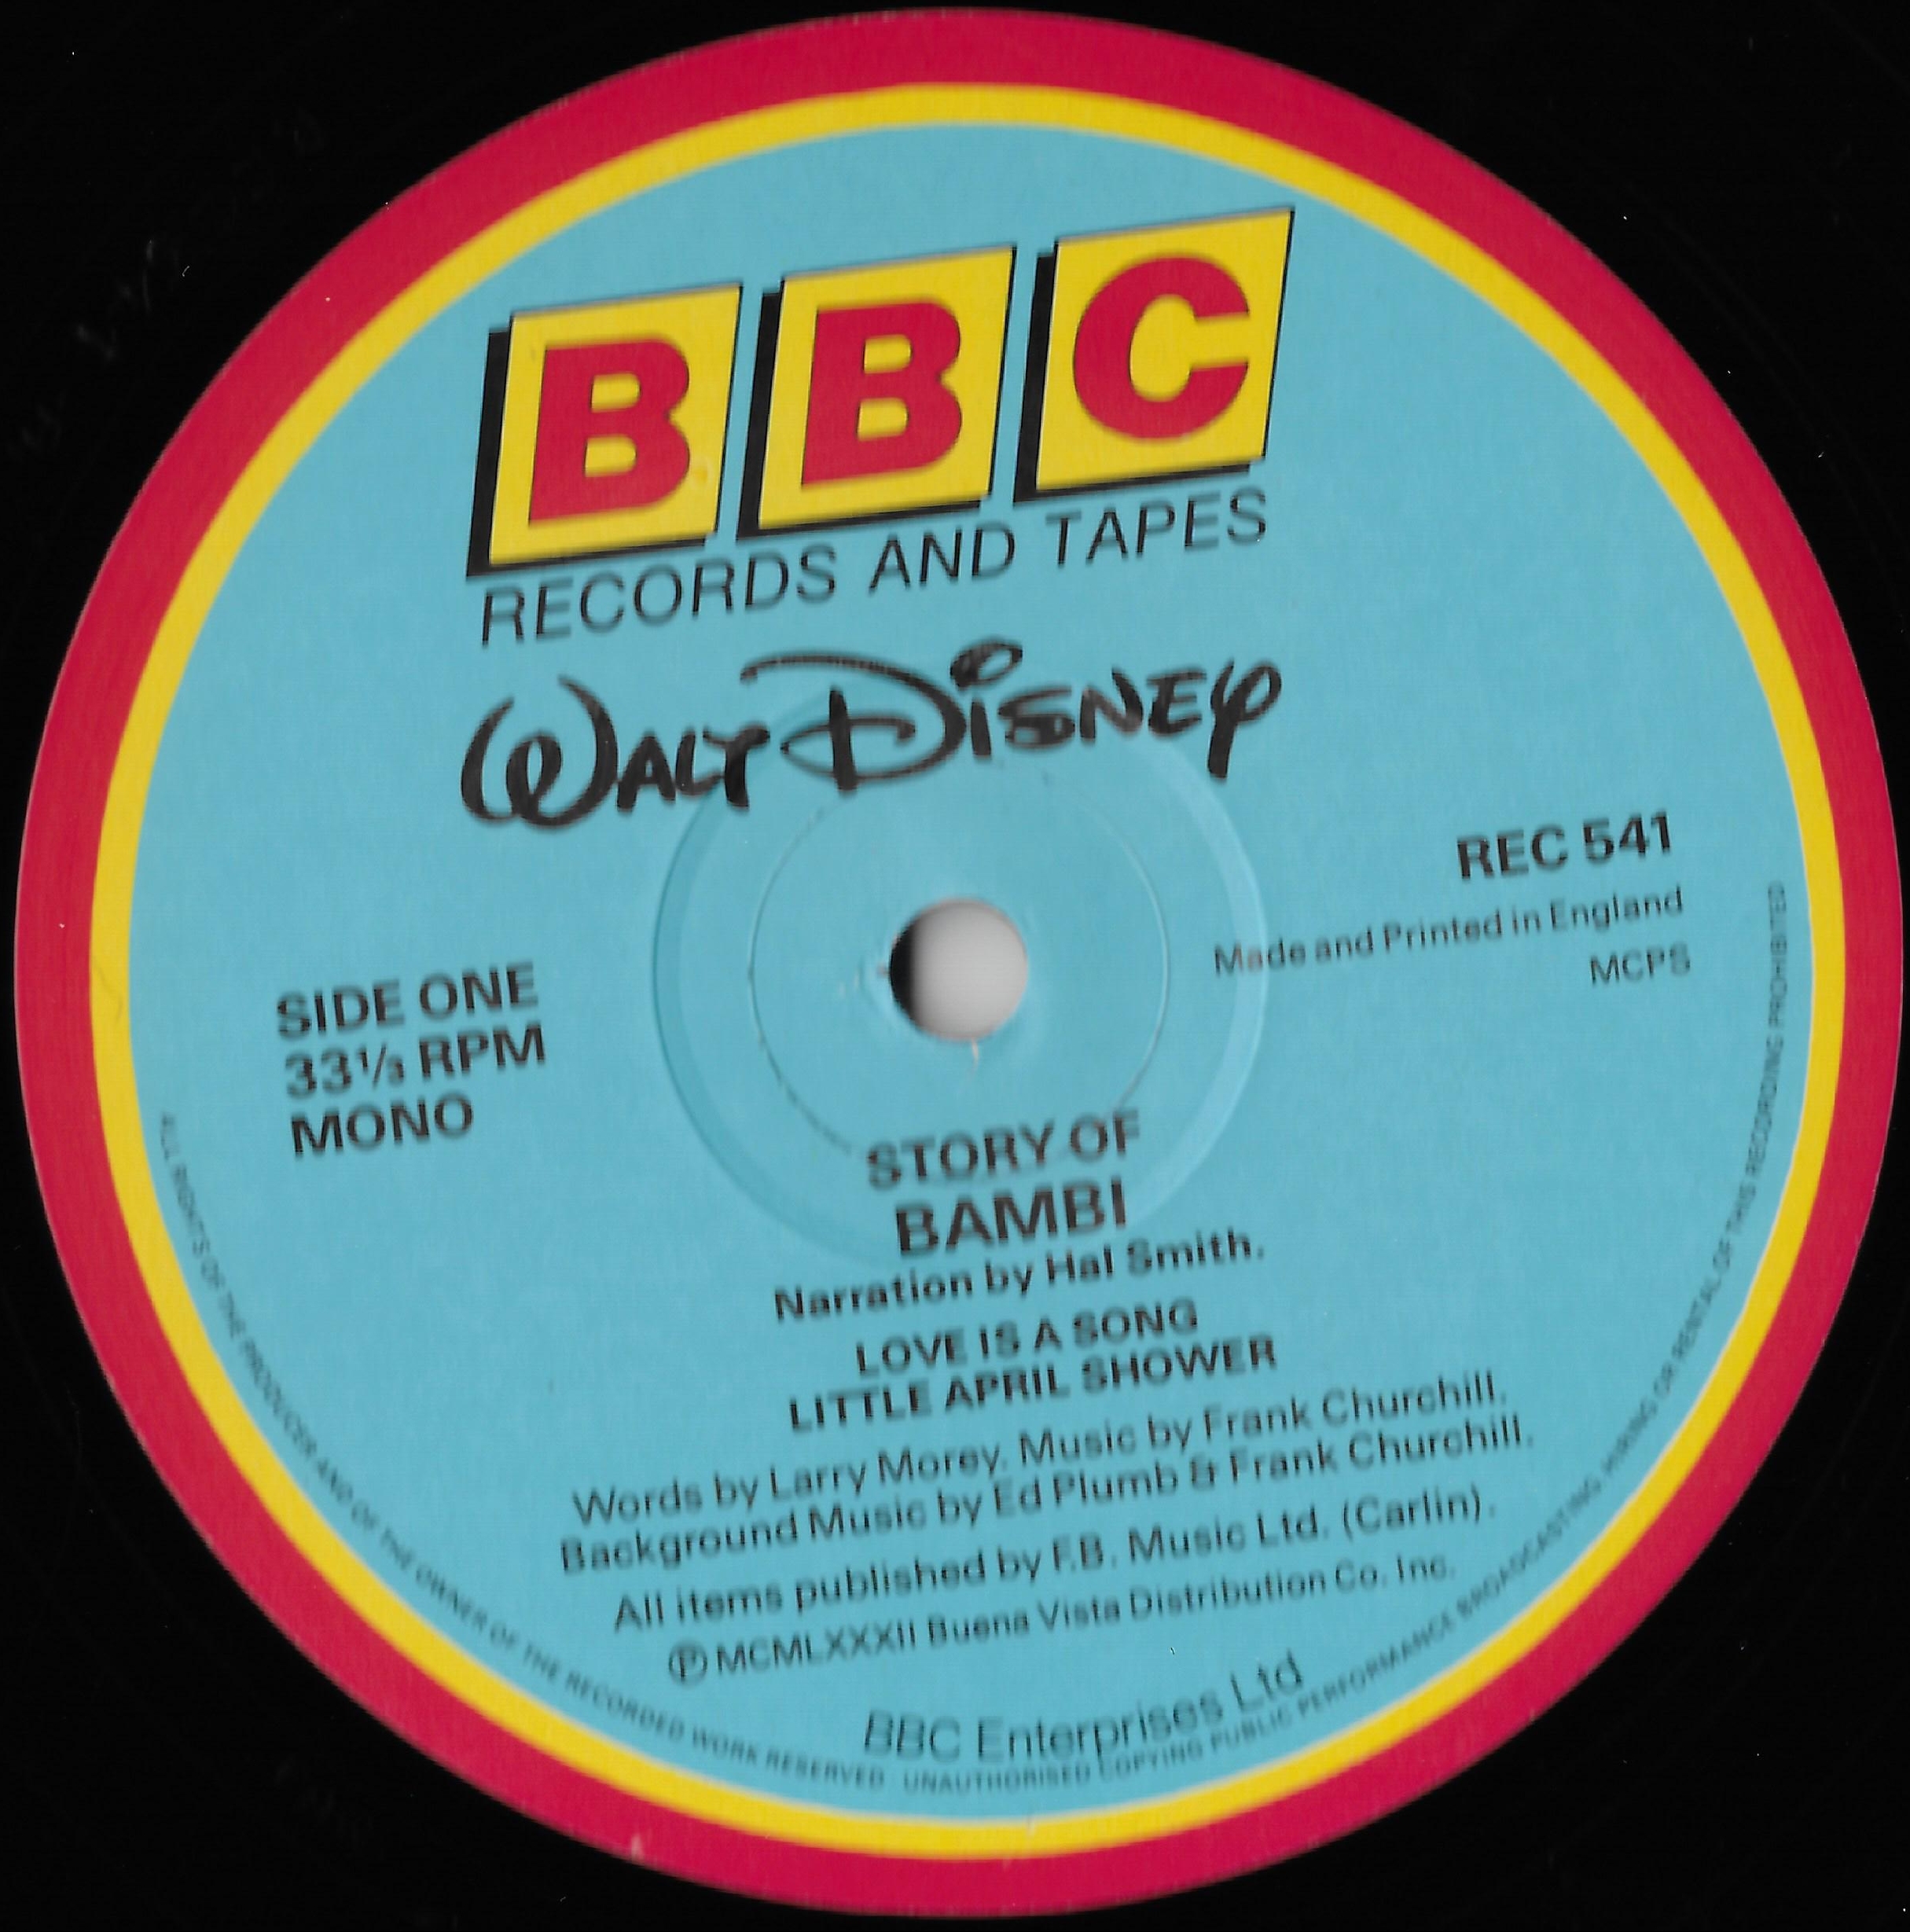 BBC Records and Tapes label